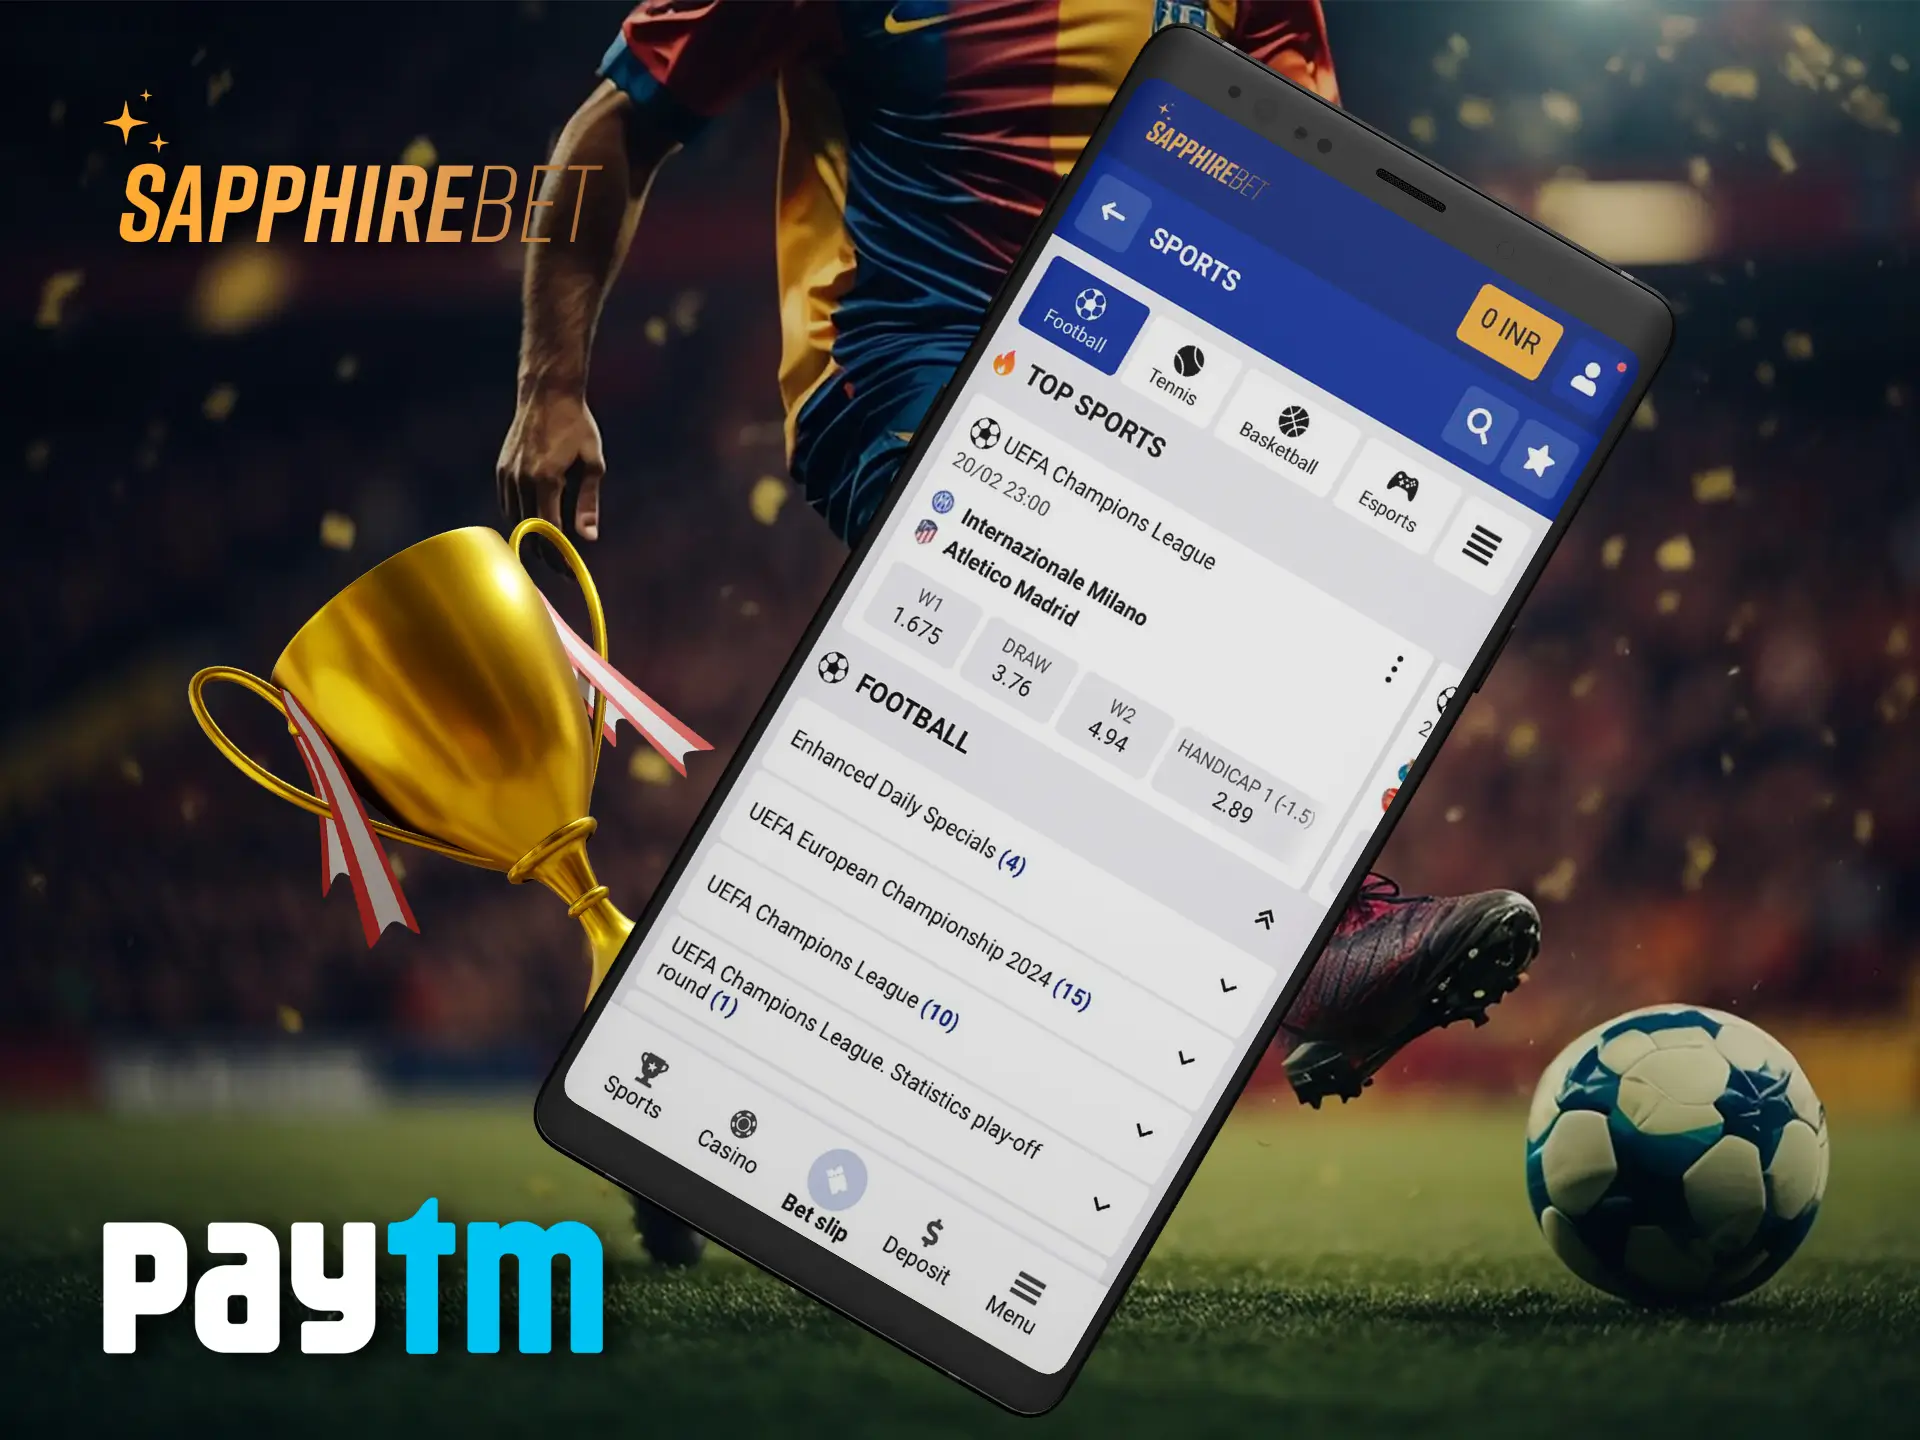 The SapphireBet app is designed for all platforms and has a withdrawal option via PayTm.